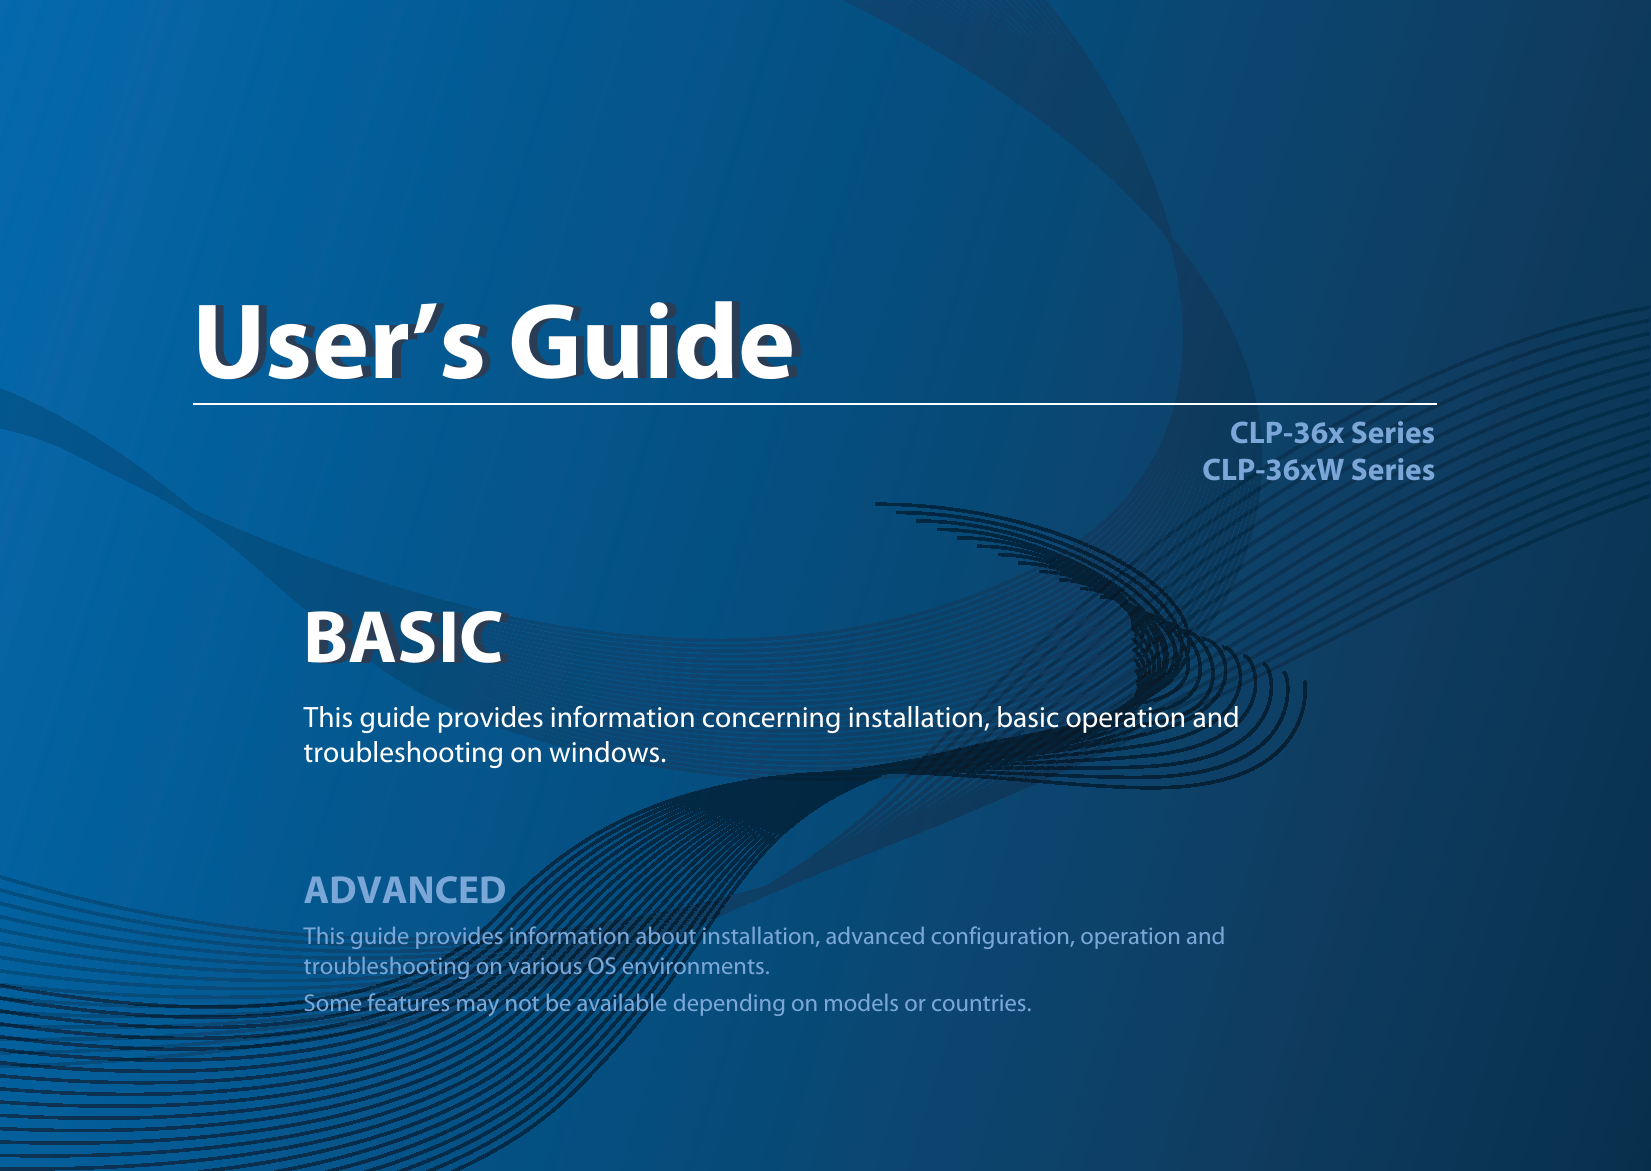 BASICUser’s GuideCLP-36x SeriesCLP-36xW SeriesBASICUser’s GuideThis guide provides information concerning installation, basic operation and troubleshooting on windows.ADVANCEDThis guide provides information about installation, advanced configuration, operation and troubleshooting on various OS environments. Some features may not be available depending on models or countries.